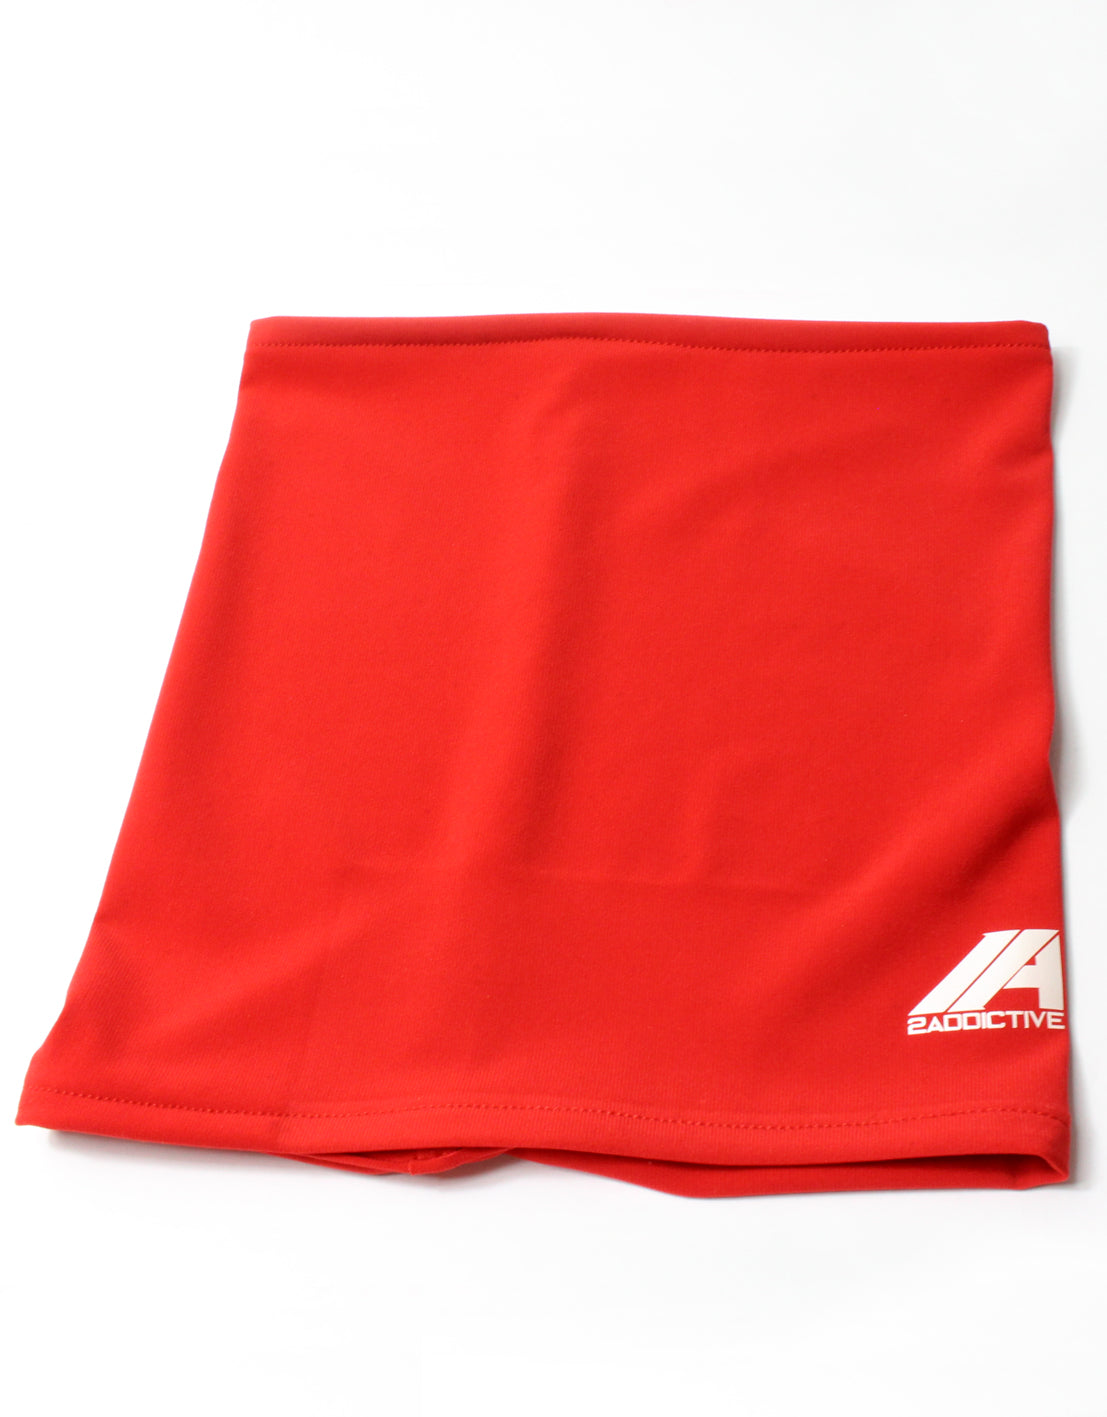 NEW Light Weight Neck Warmer/ Face covering  - Red - 2 Addictive